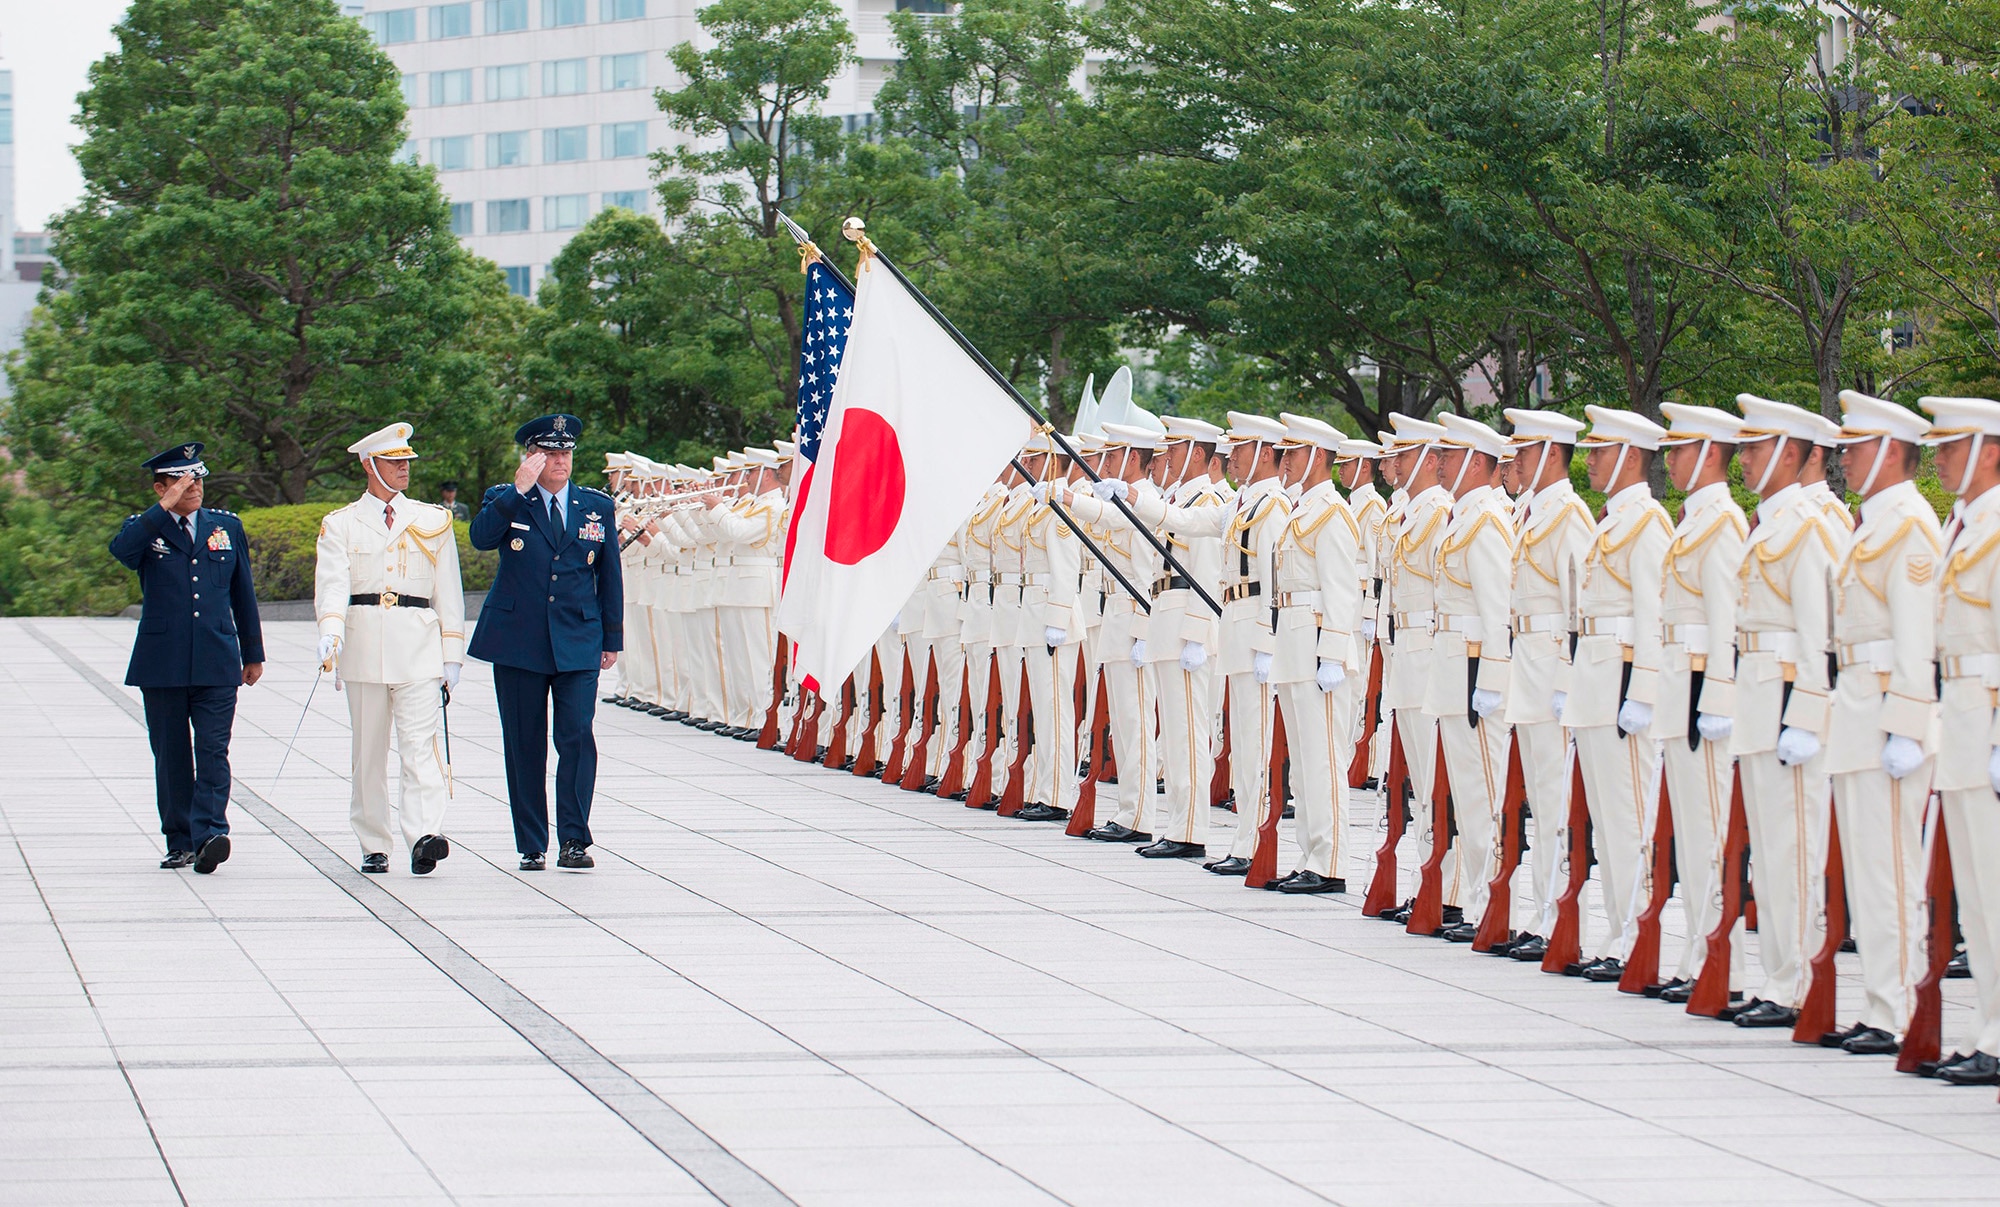 Air Force Chief of Staff Gen. Mark A. Welsh III is welcome by Gen. Harukazu Saitoh, Japan Air Self Defense Force chief of staff, and an honor cordon at the Ministry of Defense in Tokyo, Japan, Aug. 26, 2013. (Courtesy photo/Japan Self Defense Forces)